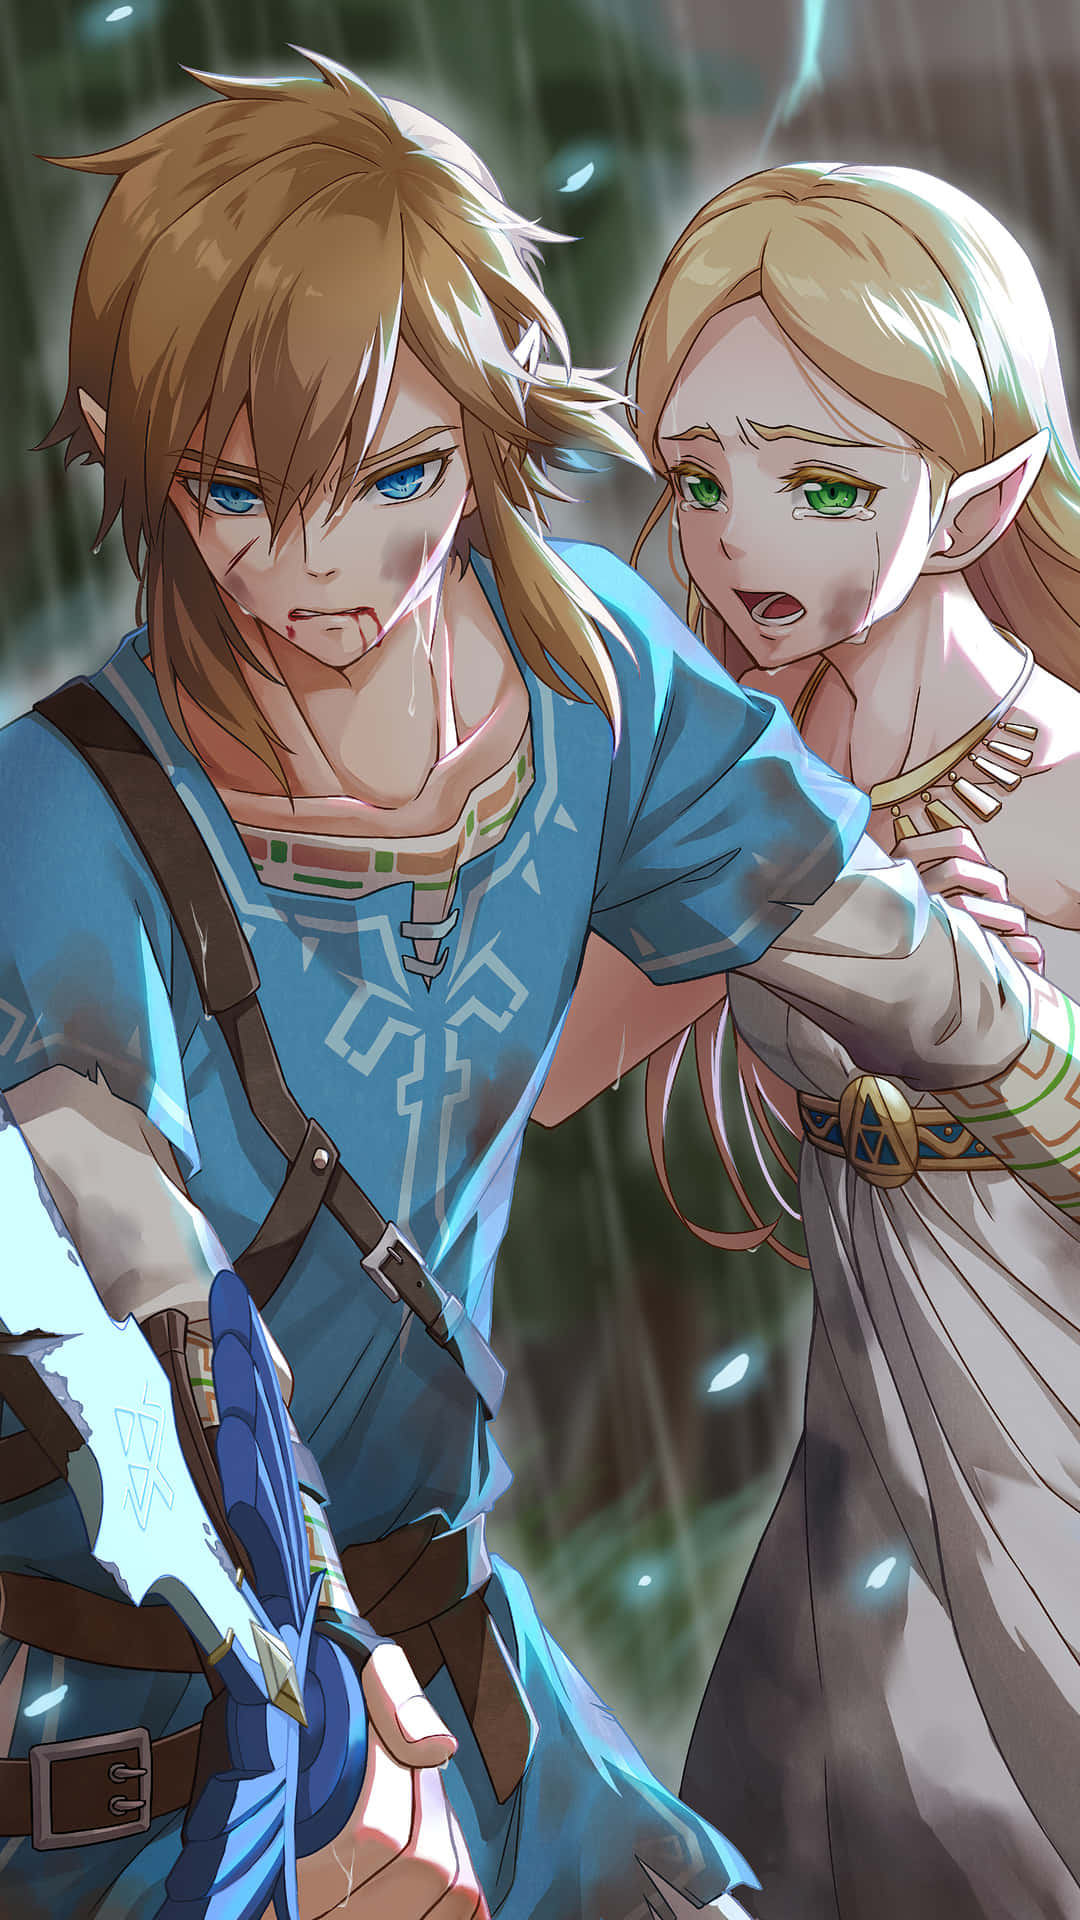 Explore the fantastical world of Hyrule with the latest The Legend of Zelda mobile game! Wallpaper